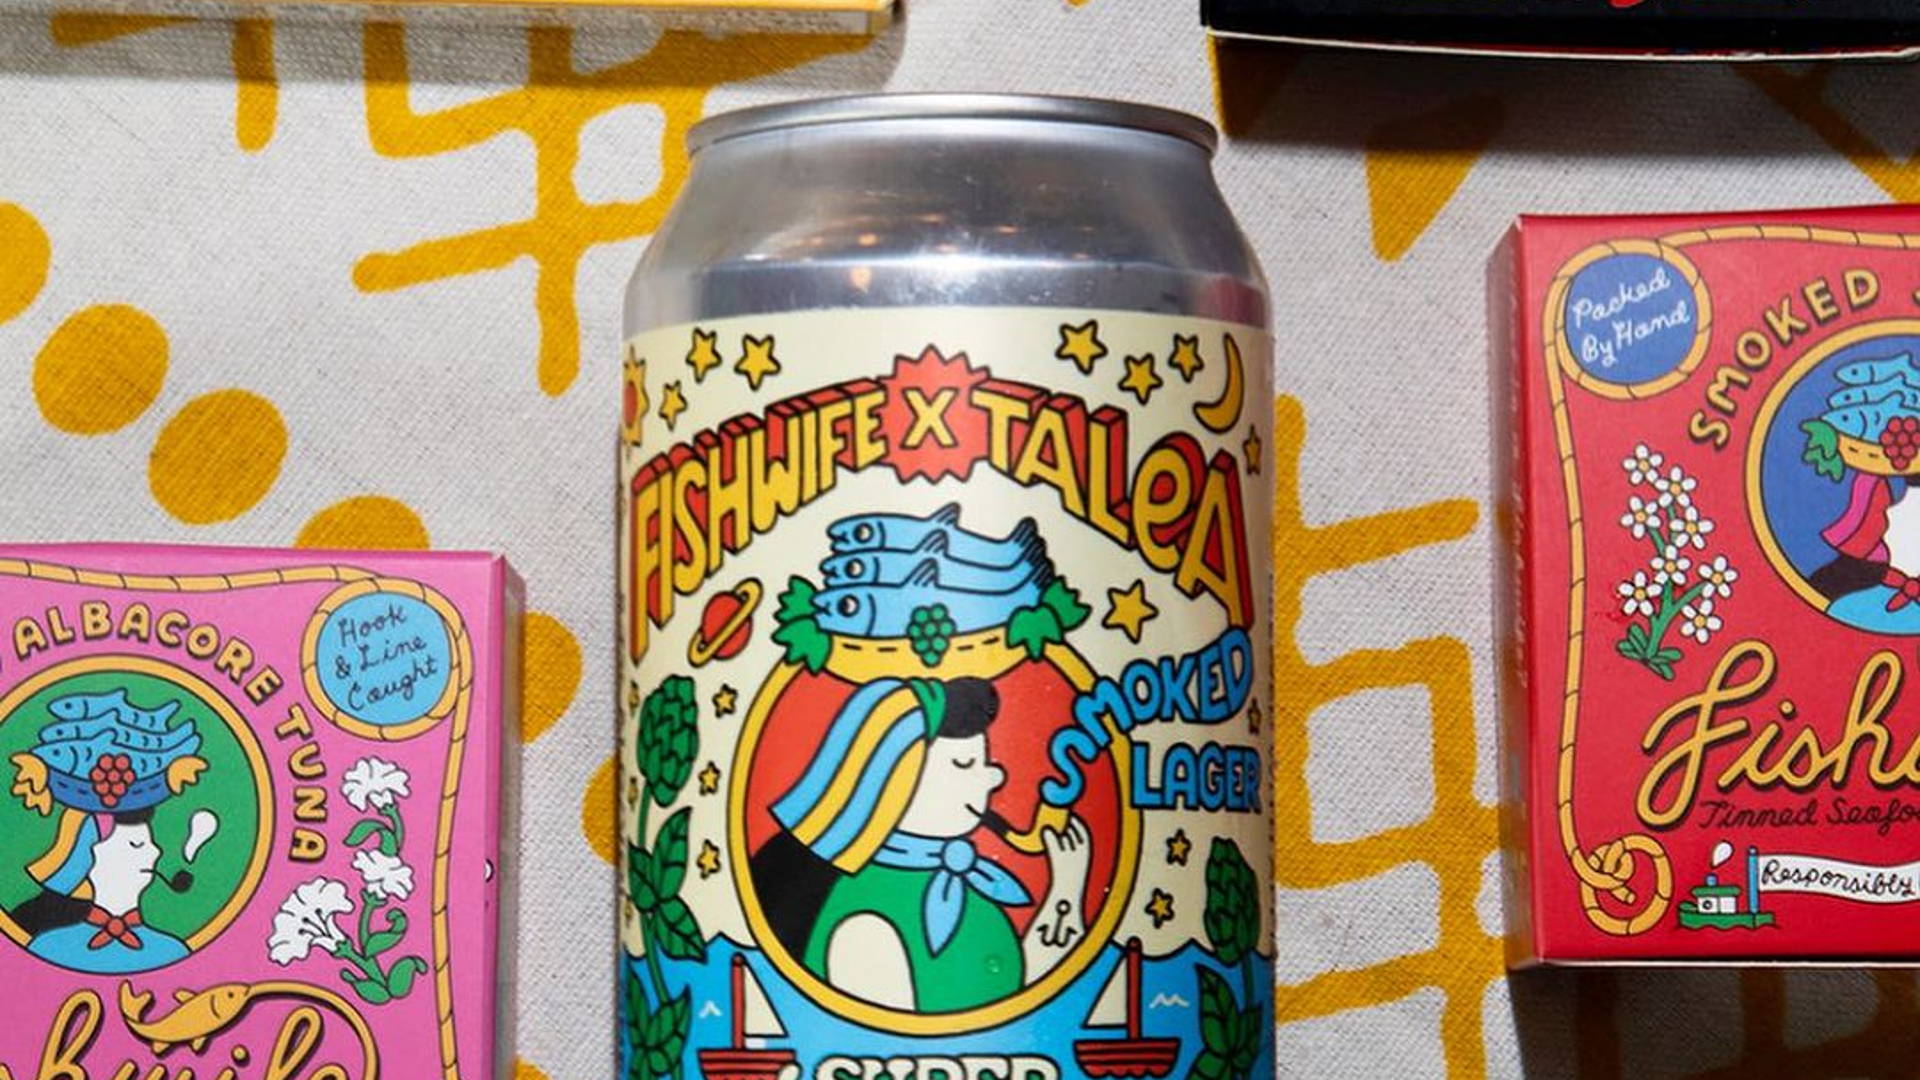 Featured image for Fishwife And Talea's Collaboration Features A Smoky Beer And Stunning Packaging